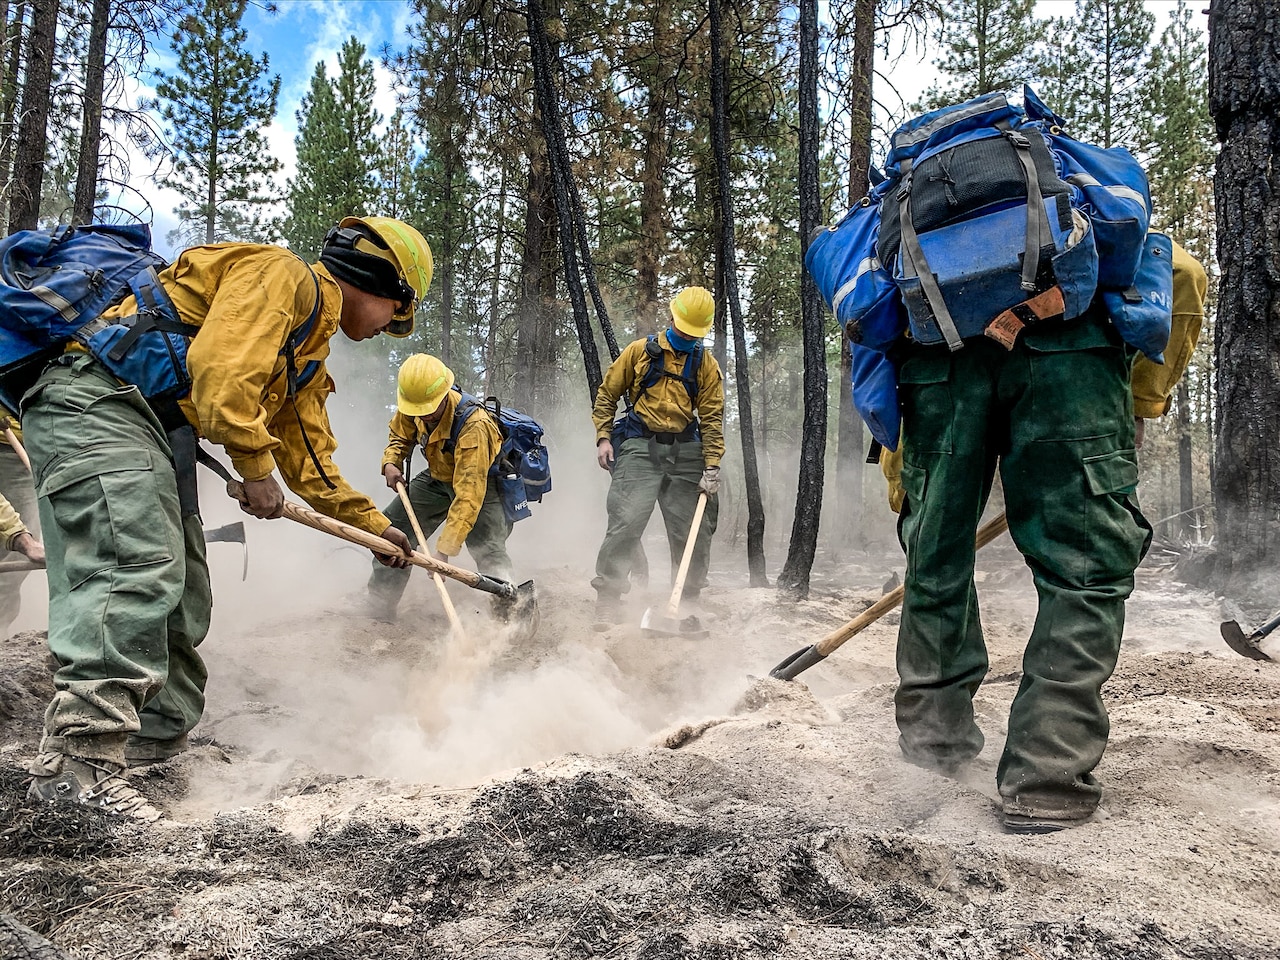 Four firemen dig in a powdery ground and kick up dust in a forest.